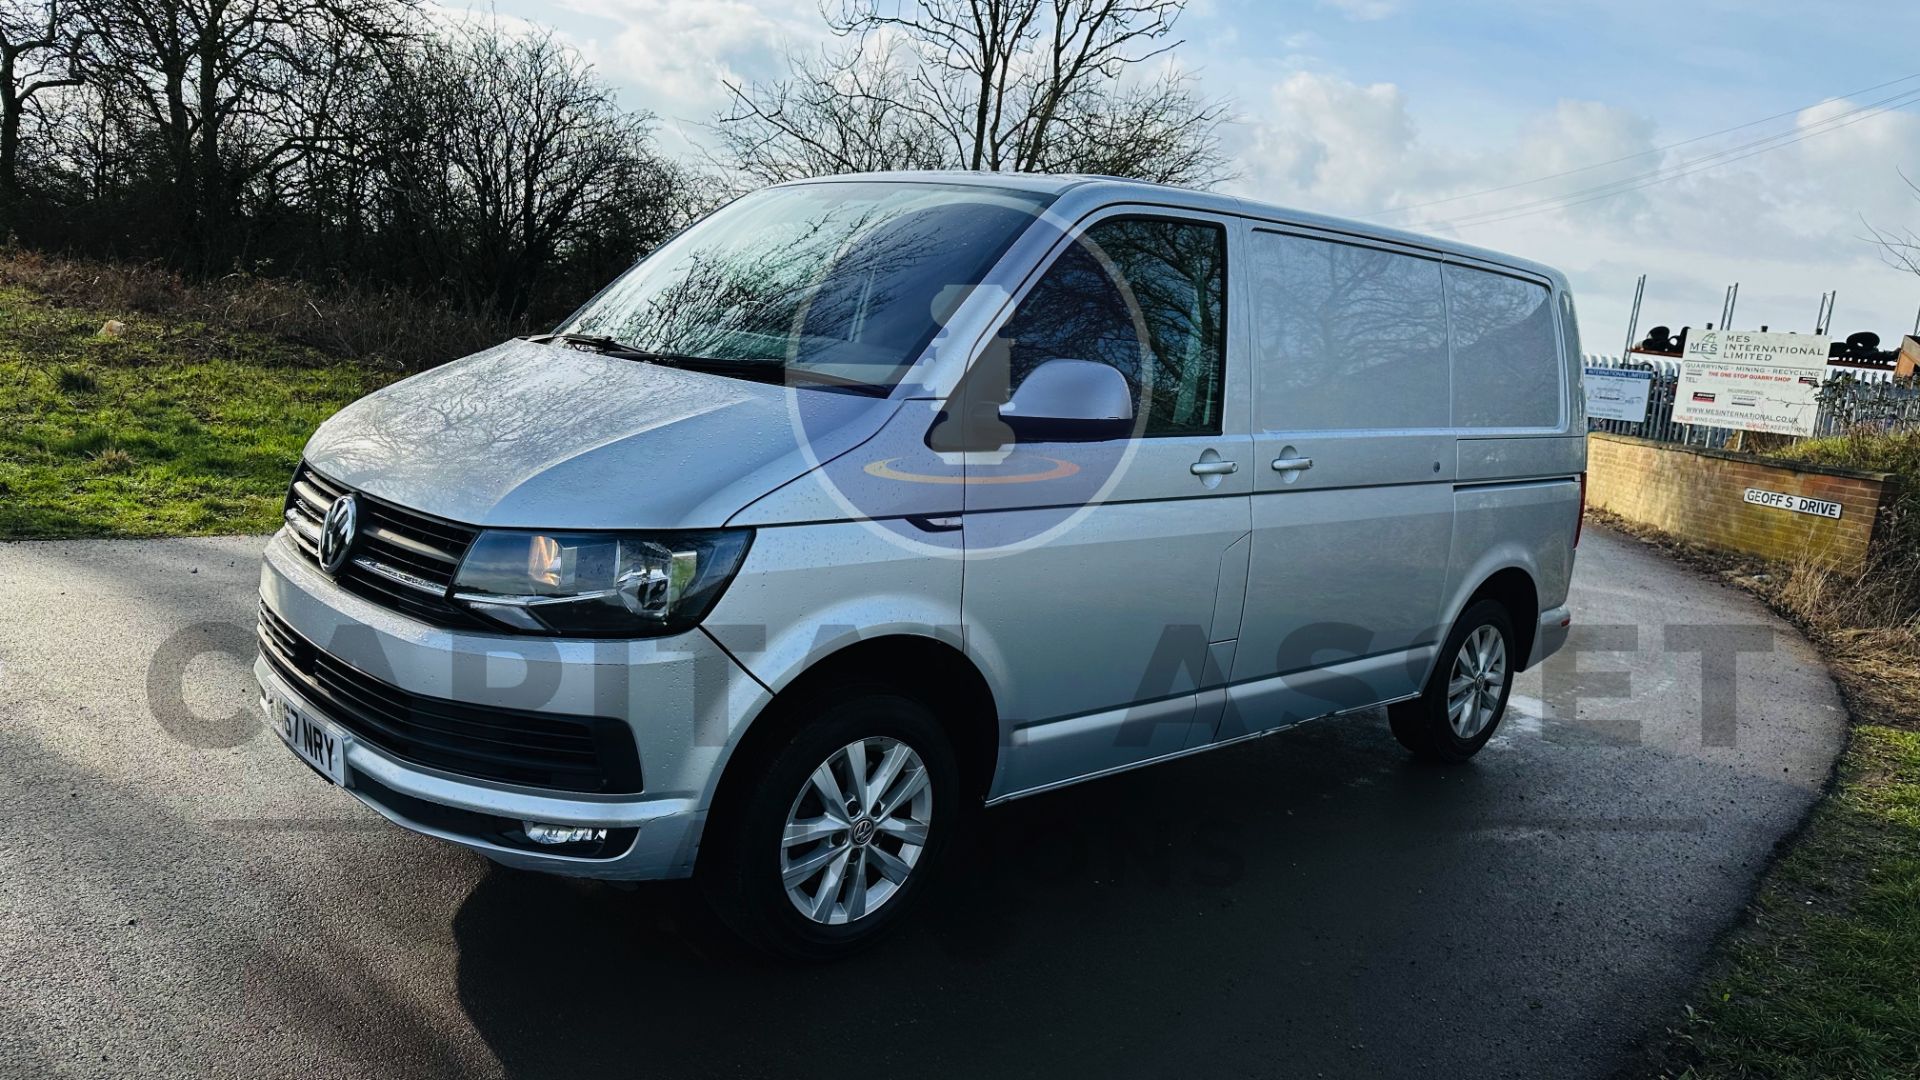 (On Sale) VOLKSWAGEN TRANSPORTER T30 *HIGHLINE EDITION* (67 REG - EURO 6) AUTO STOP/START *AIR CON* - Image 3 of 46